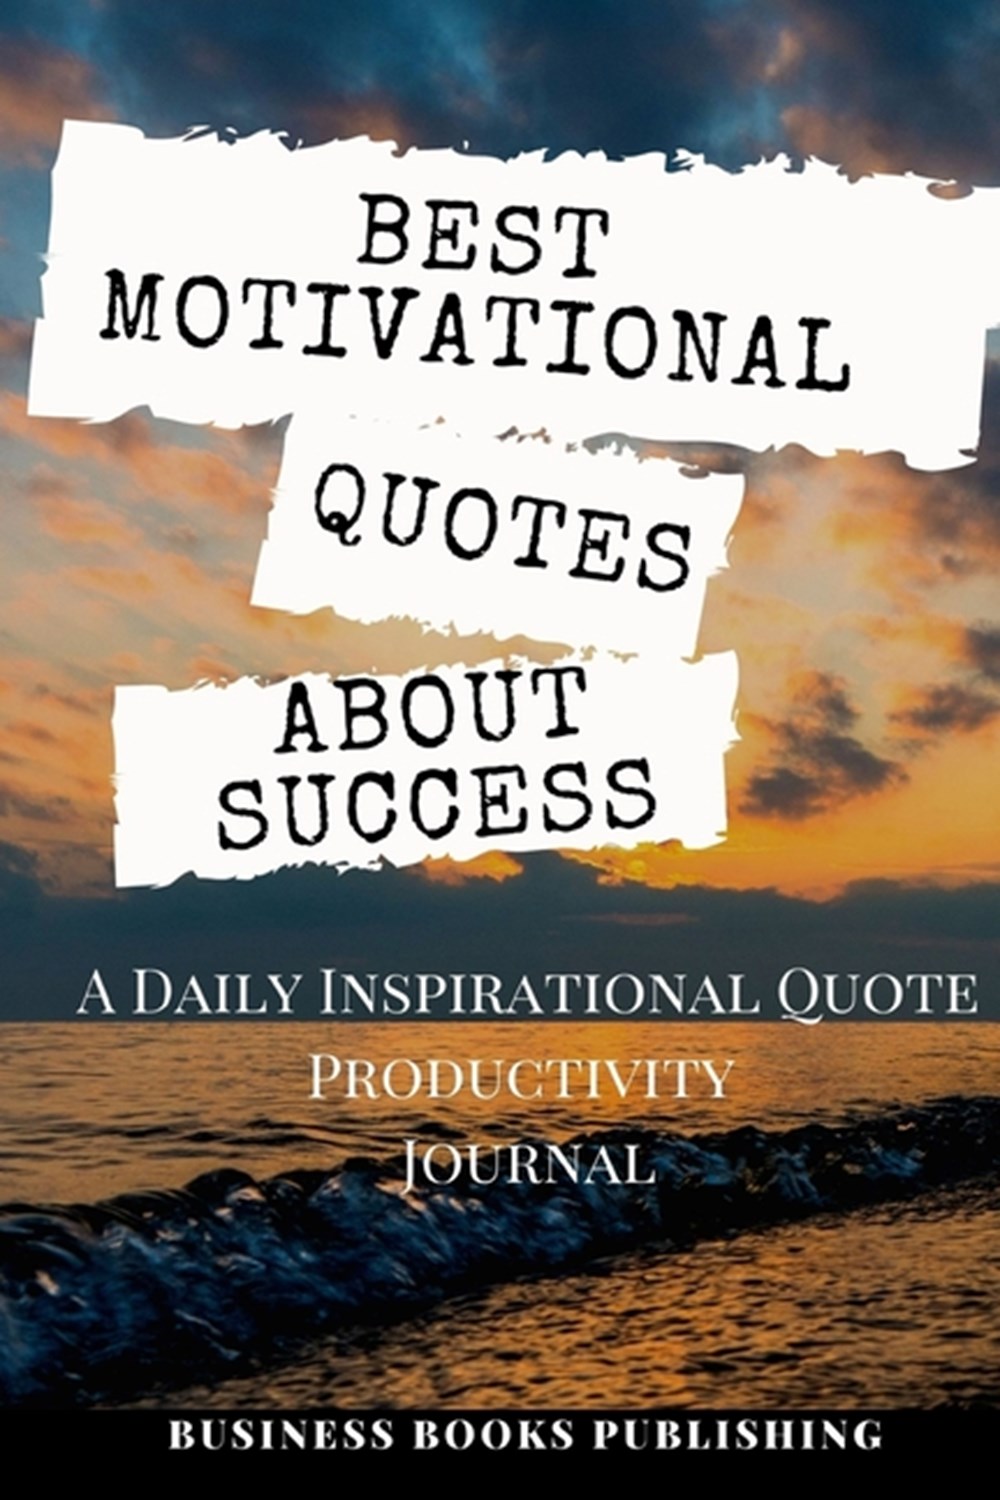 Best Motivational Quotes about Success A Daily Inspirational Productivity Journal Workbook with a Co